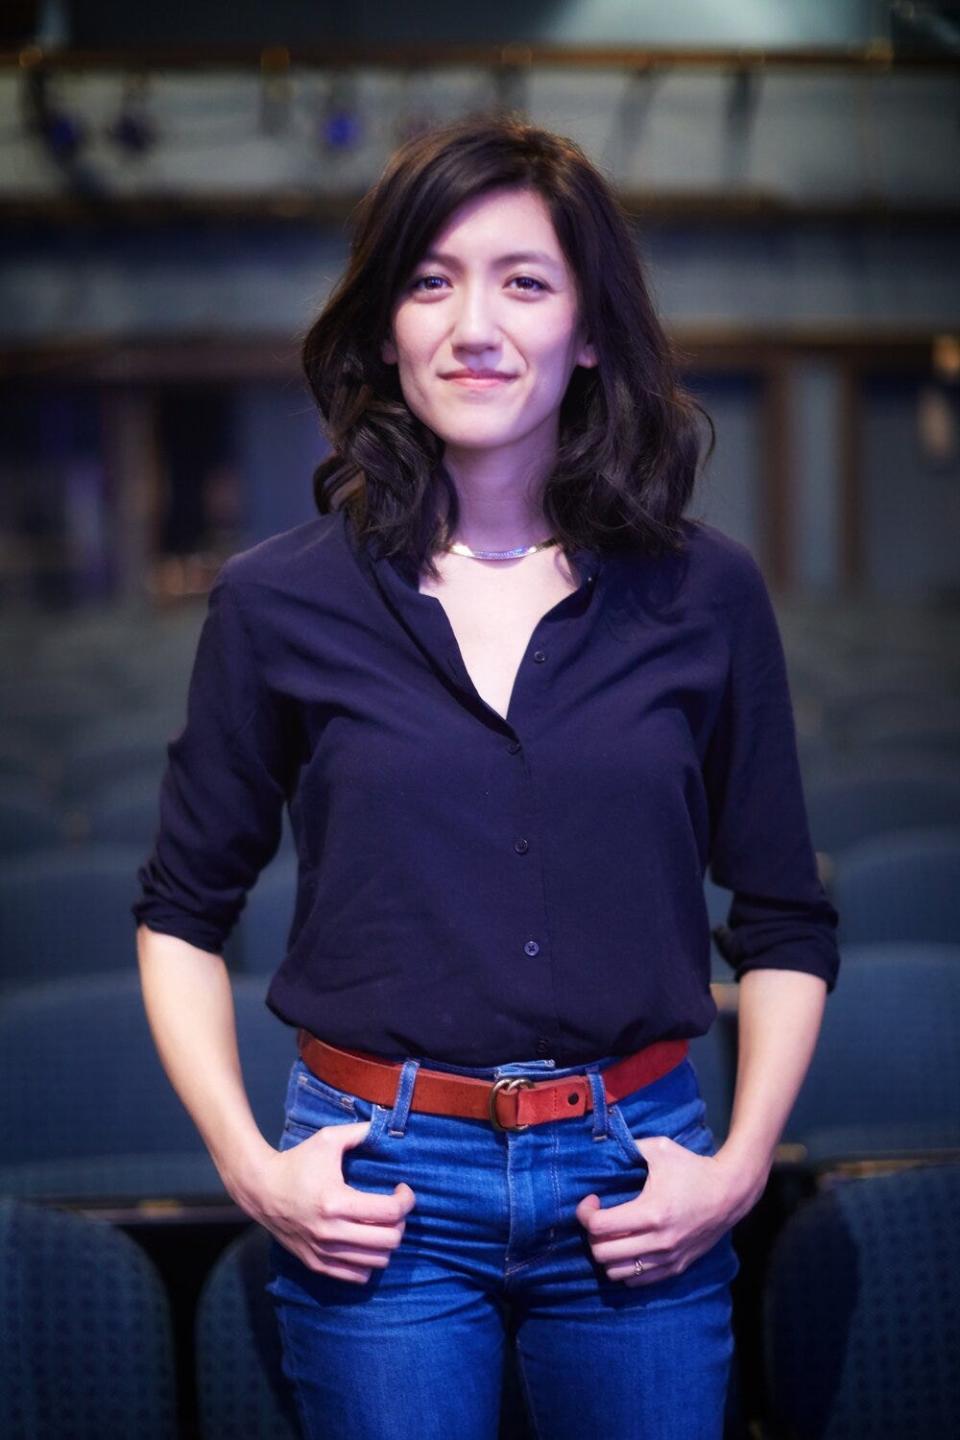 Playwright Anna Ouyang Moench is the author of “Birds of North America” at Urbanite Theatre.